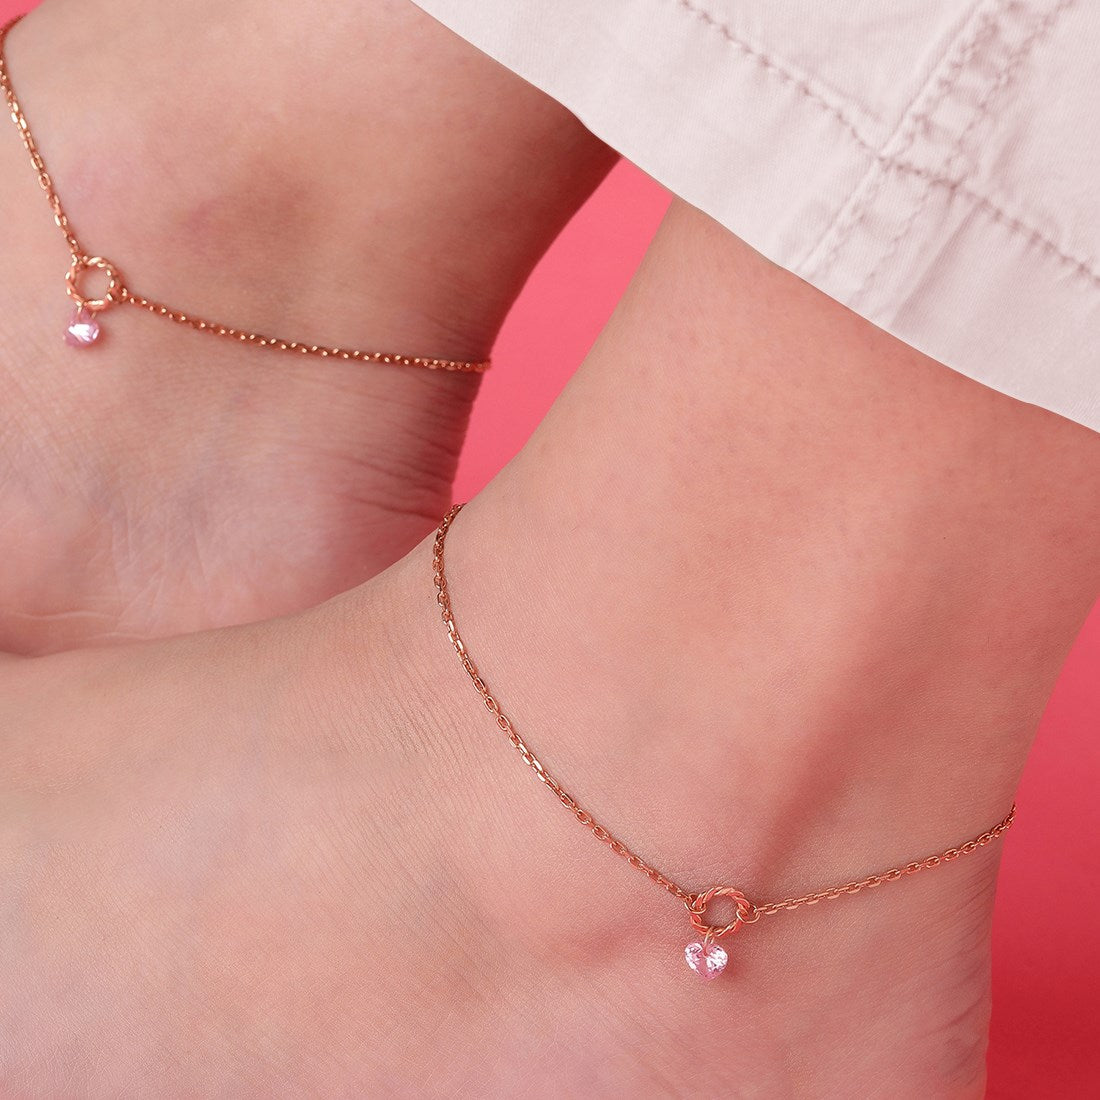 Roseate Charm 925 Sterling Silver Chain Anklet with Cubic Zirconia